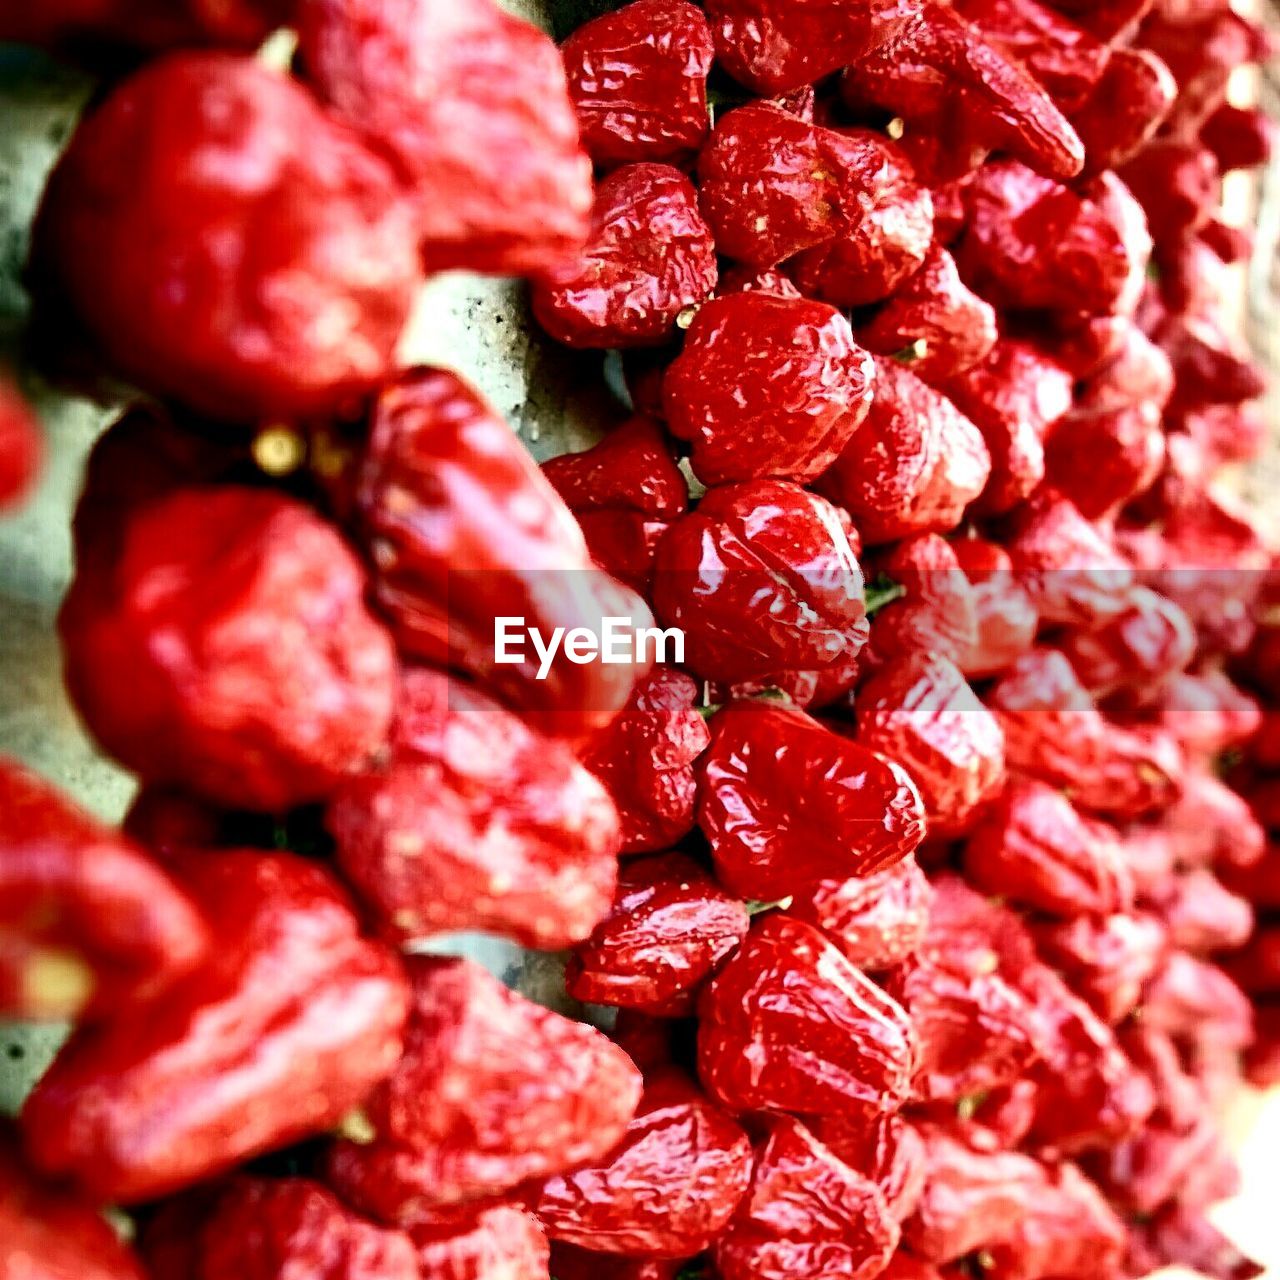 Detail shot of red chilies